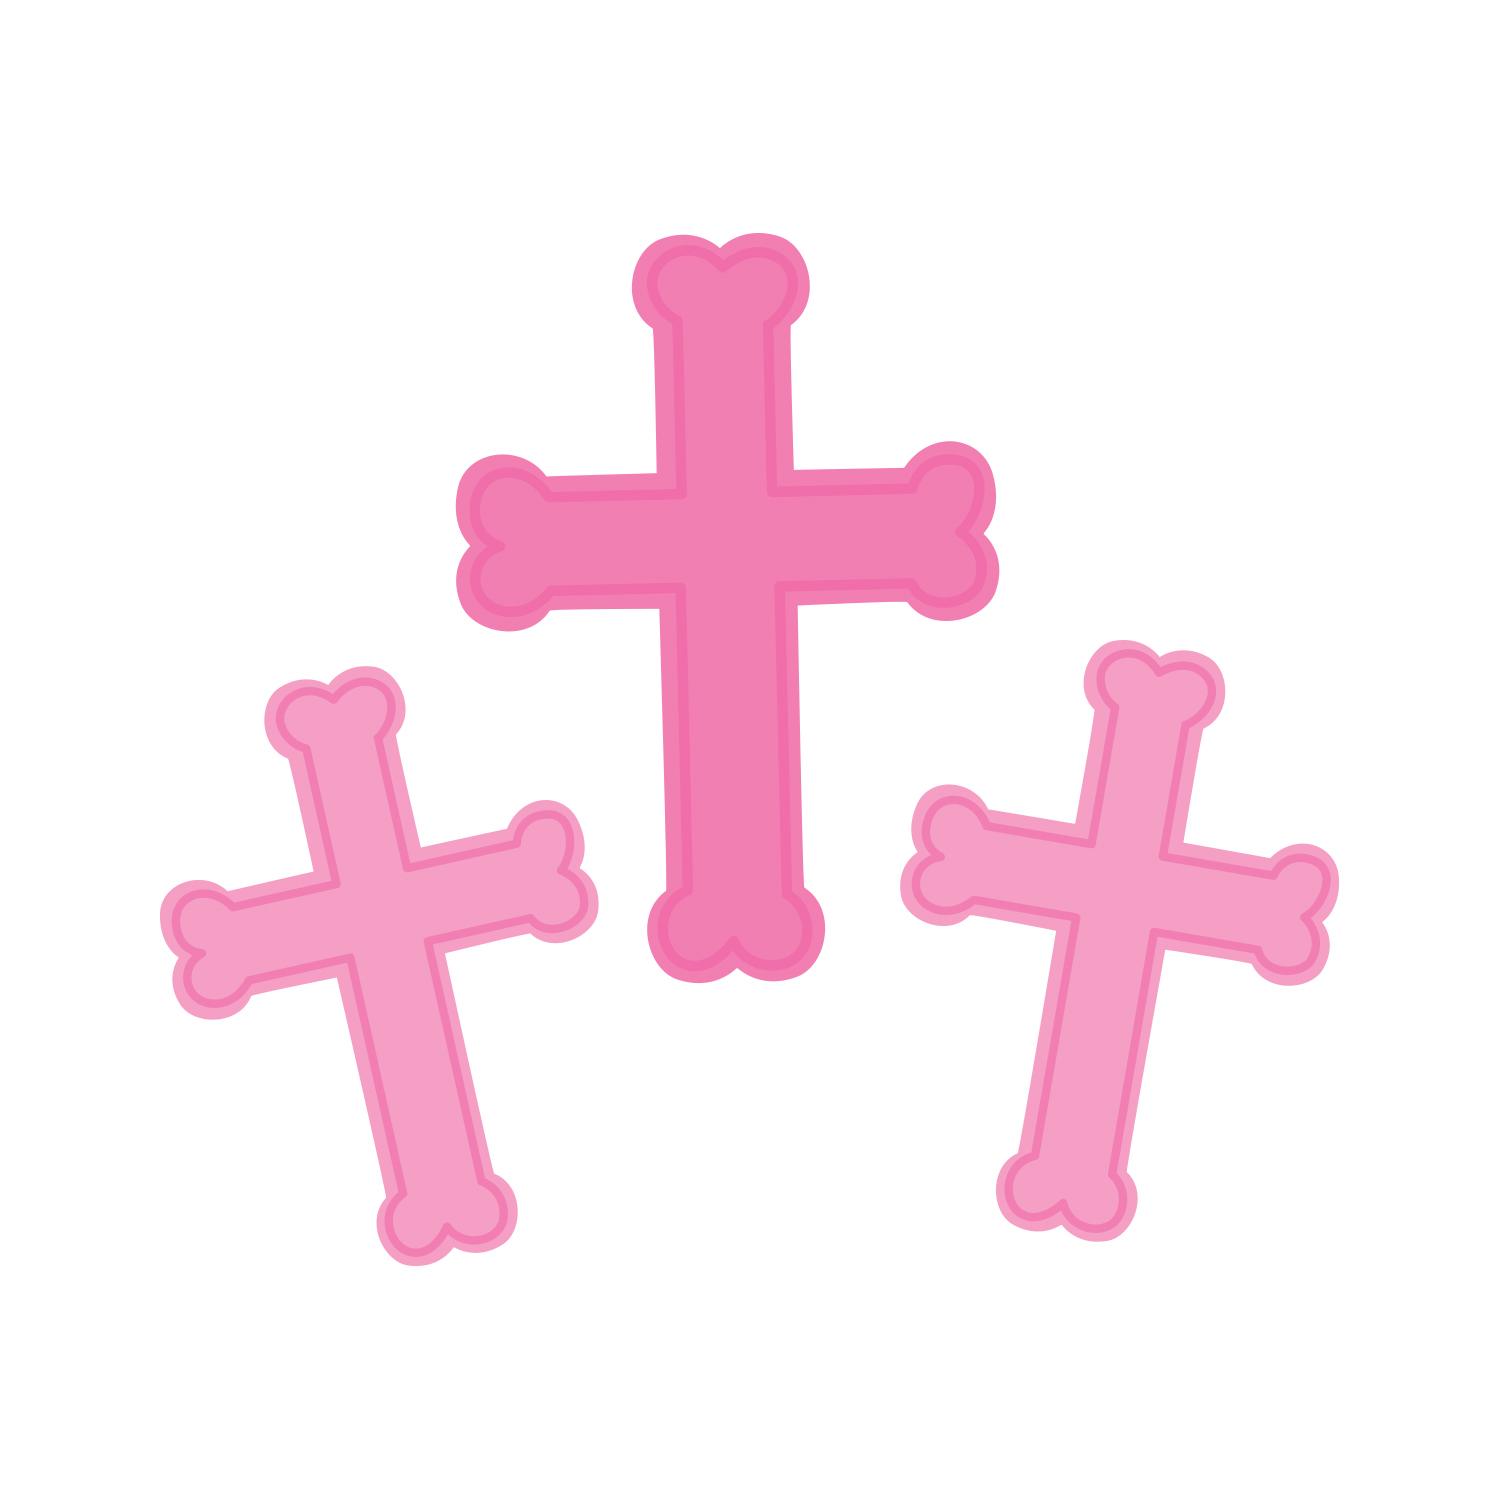 Cutout, 12"/8" As't Shaped, 3 Pink Crosses (36 ct) - Party ...